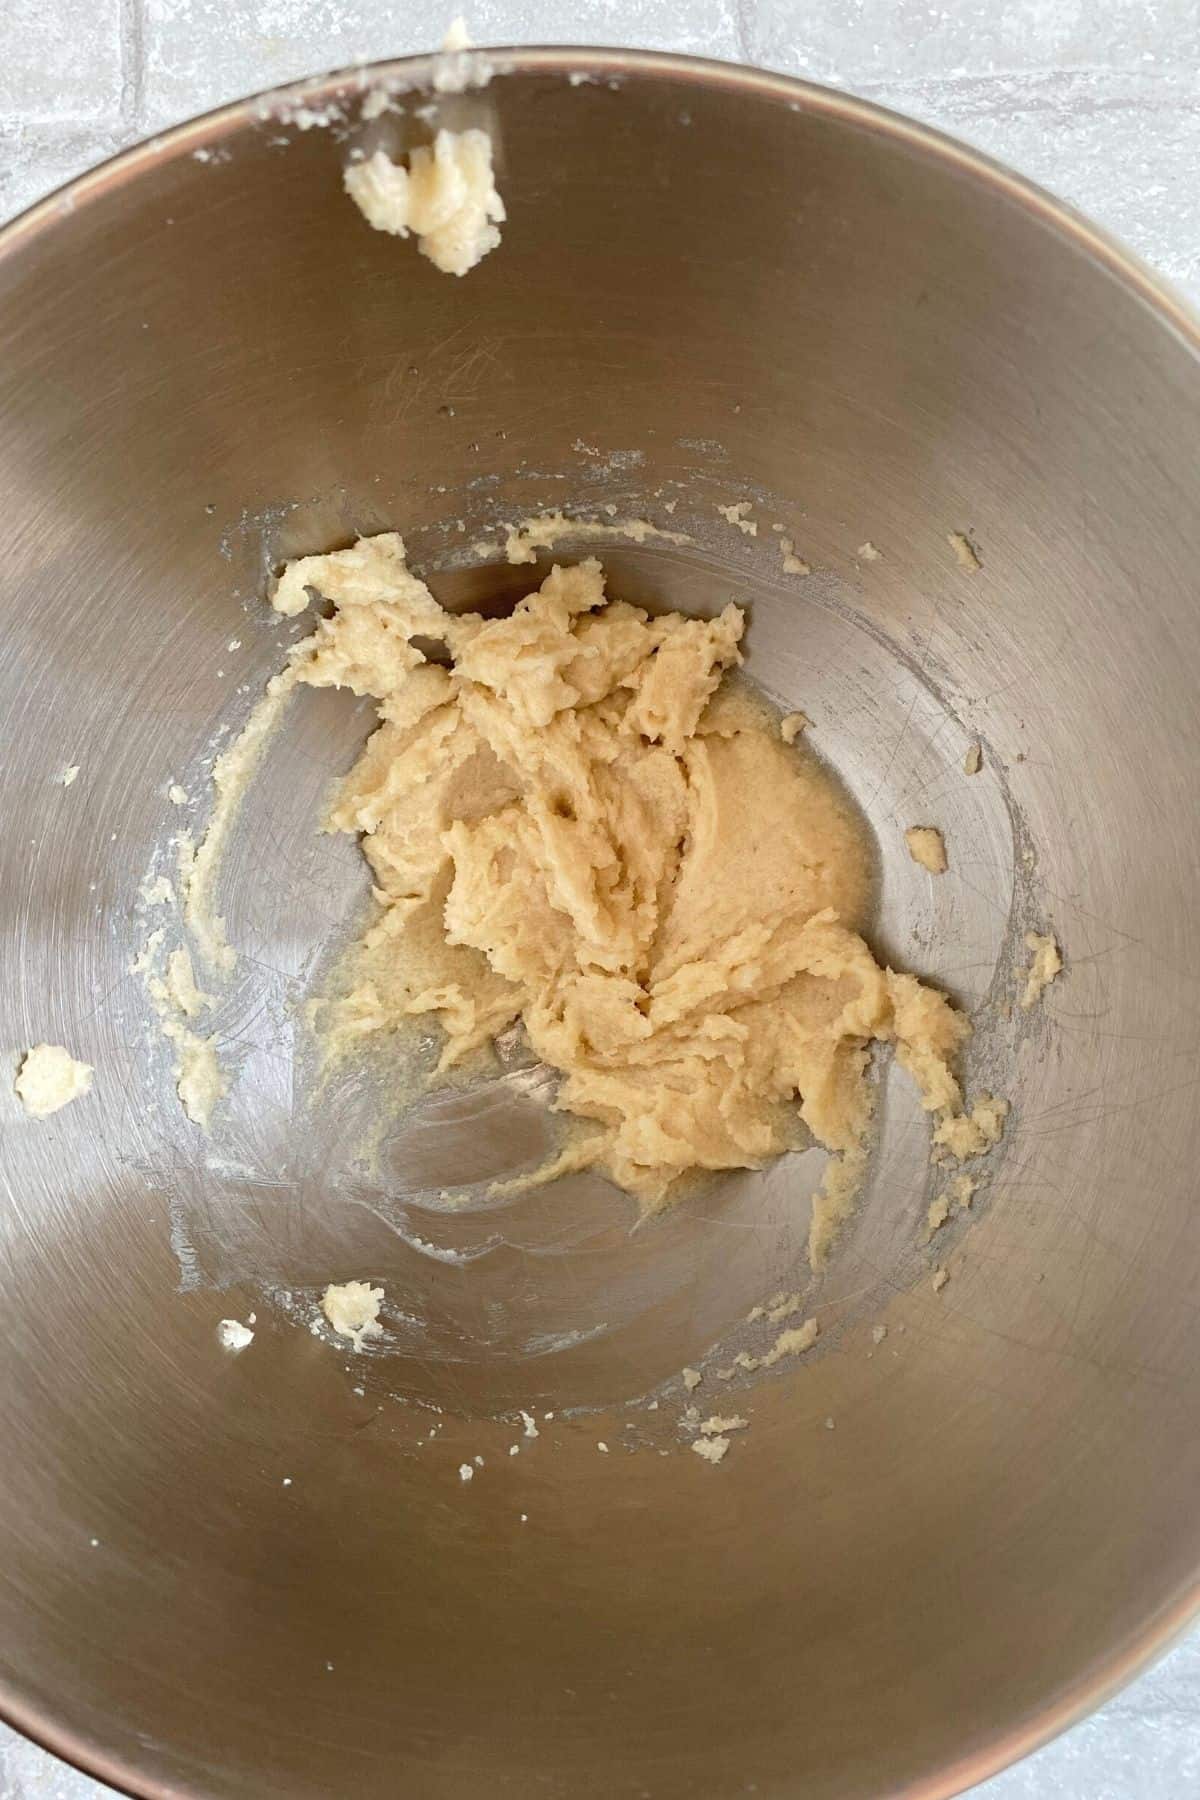 coconut oil, cream cheese alternative and sugar combined in a mixing bowl